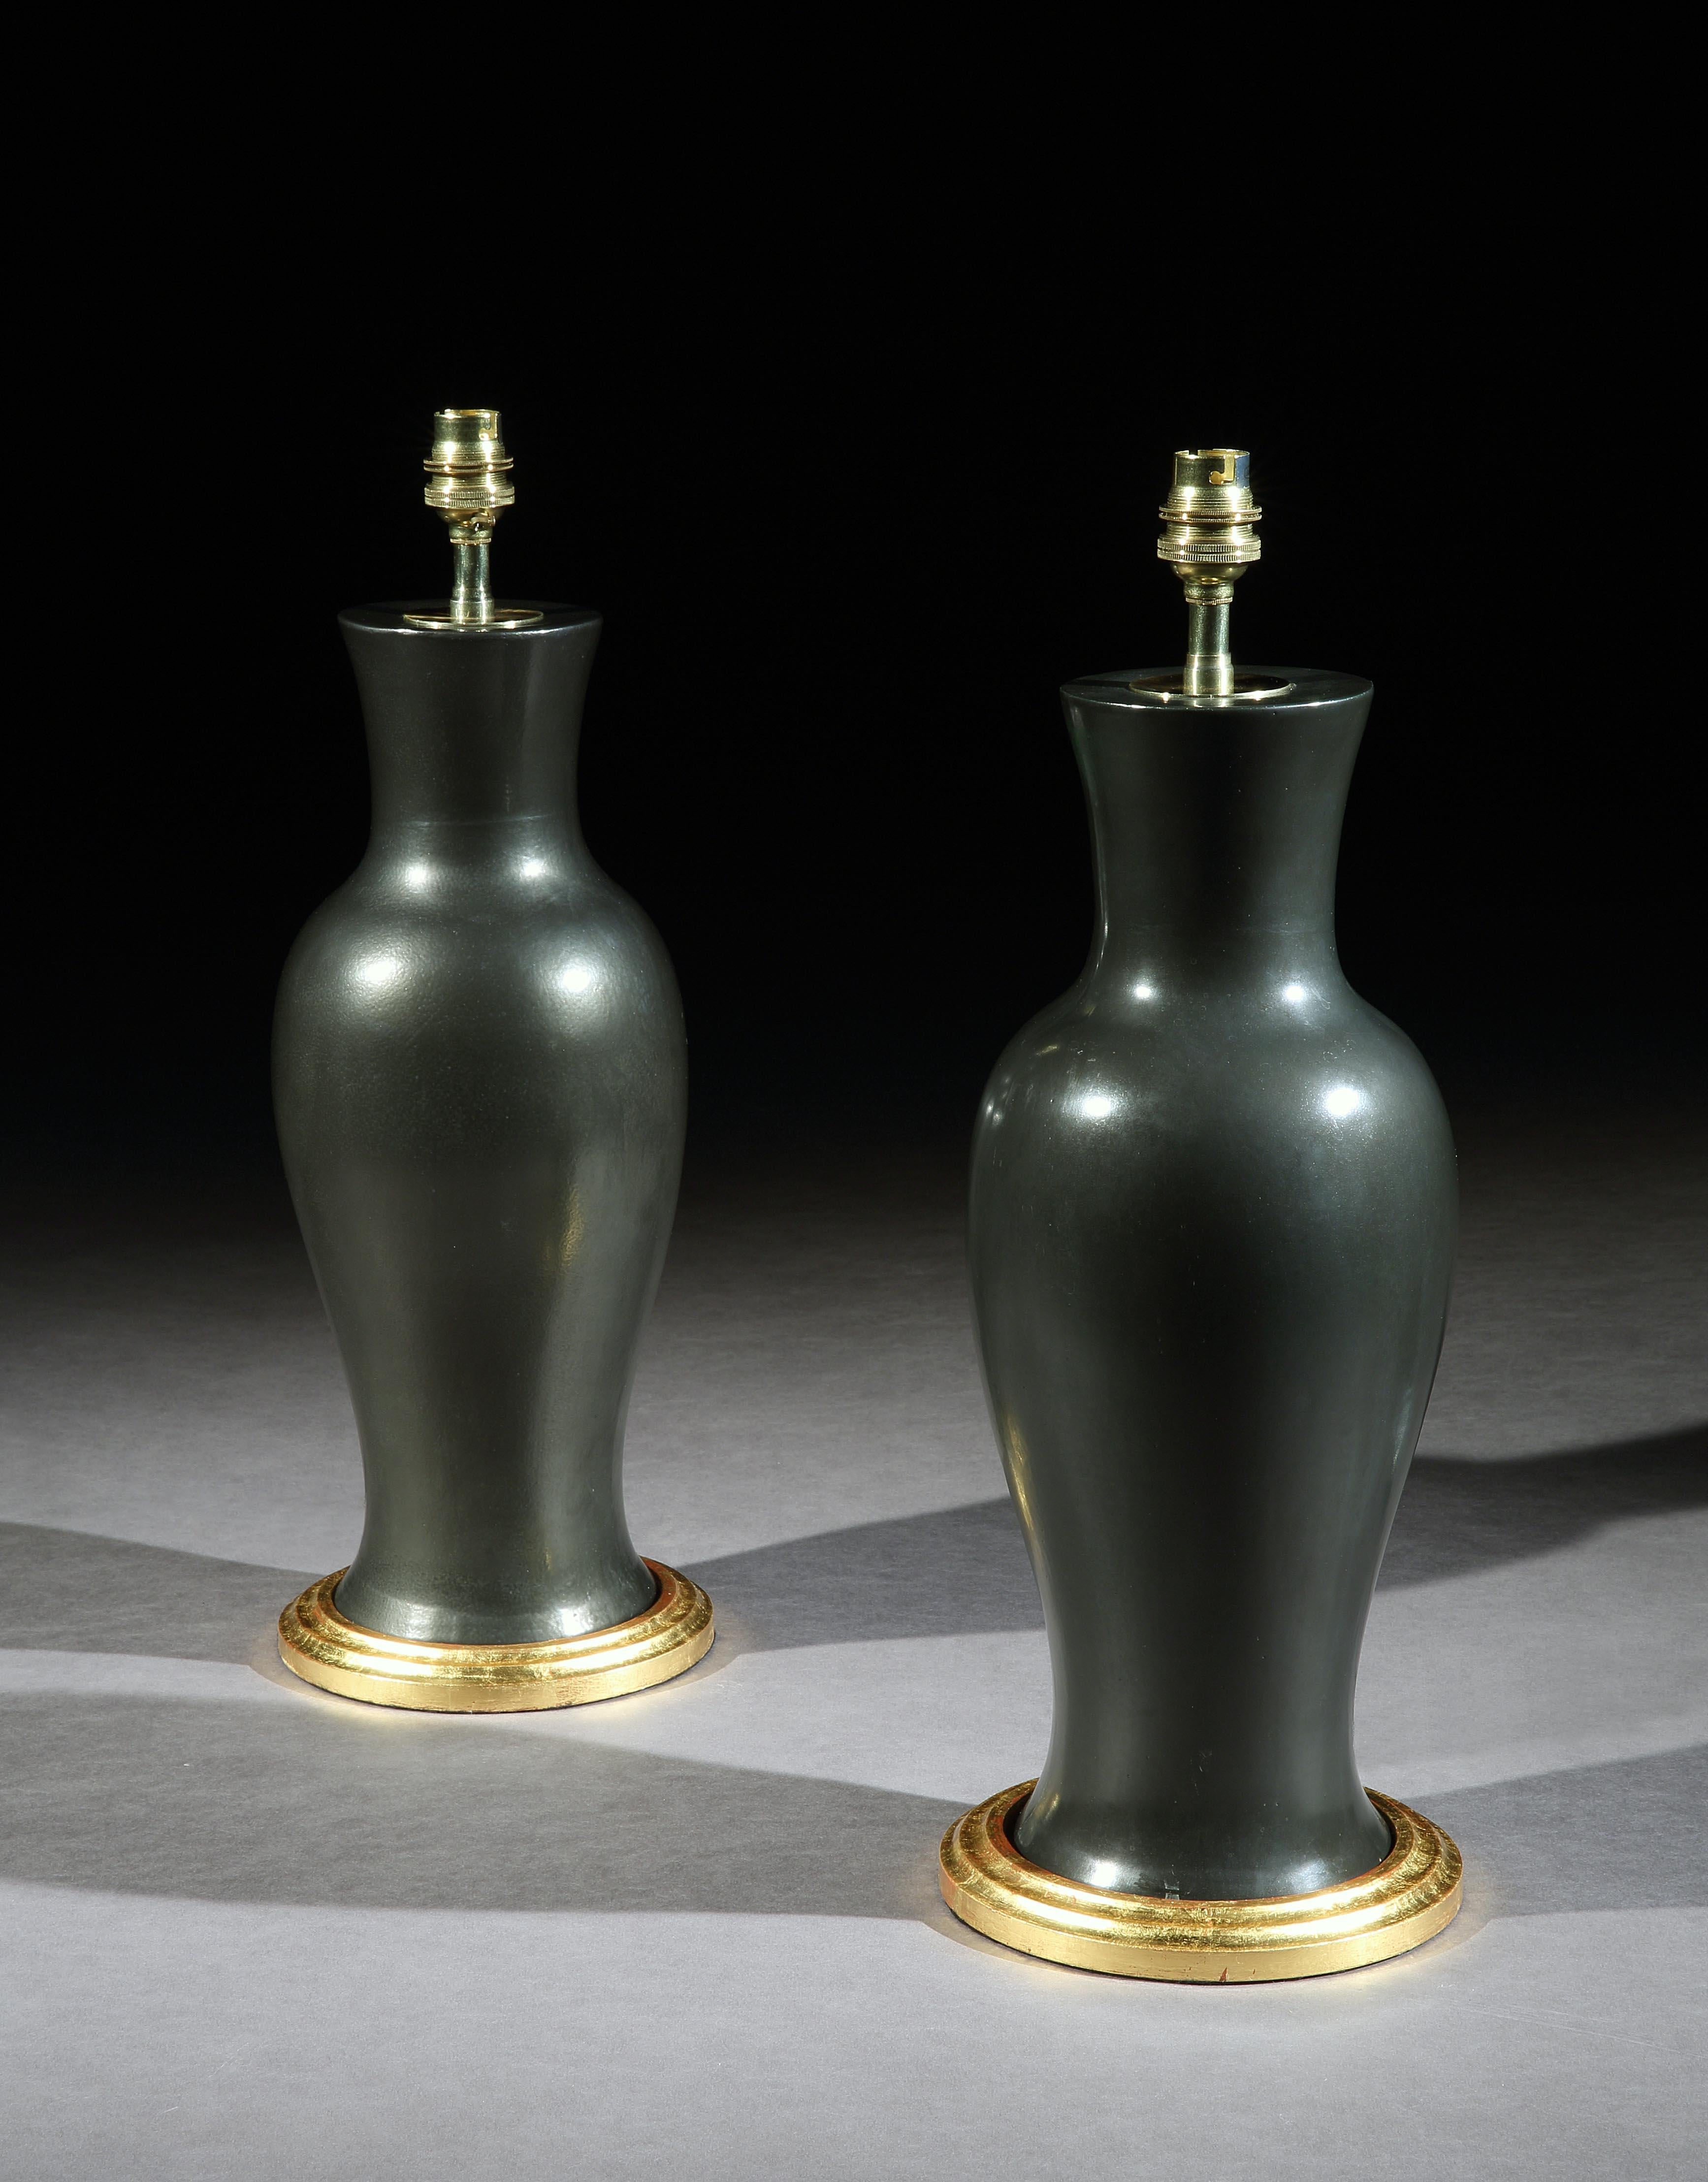 A pair of Chinese black porcelain baluster vases of elegant form. Now mounted as table lamps with hand gilded turned bases.

Measures: Height of vase 16 in (41 cm) including base, excluding electrical fitments and lampshades

These lamps can be